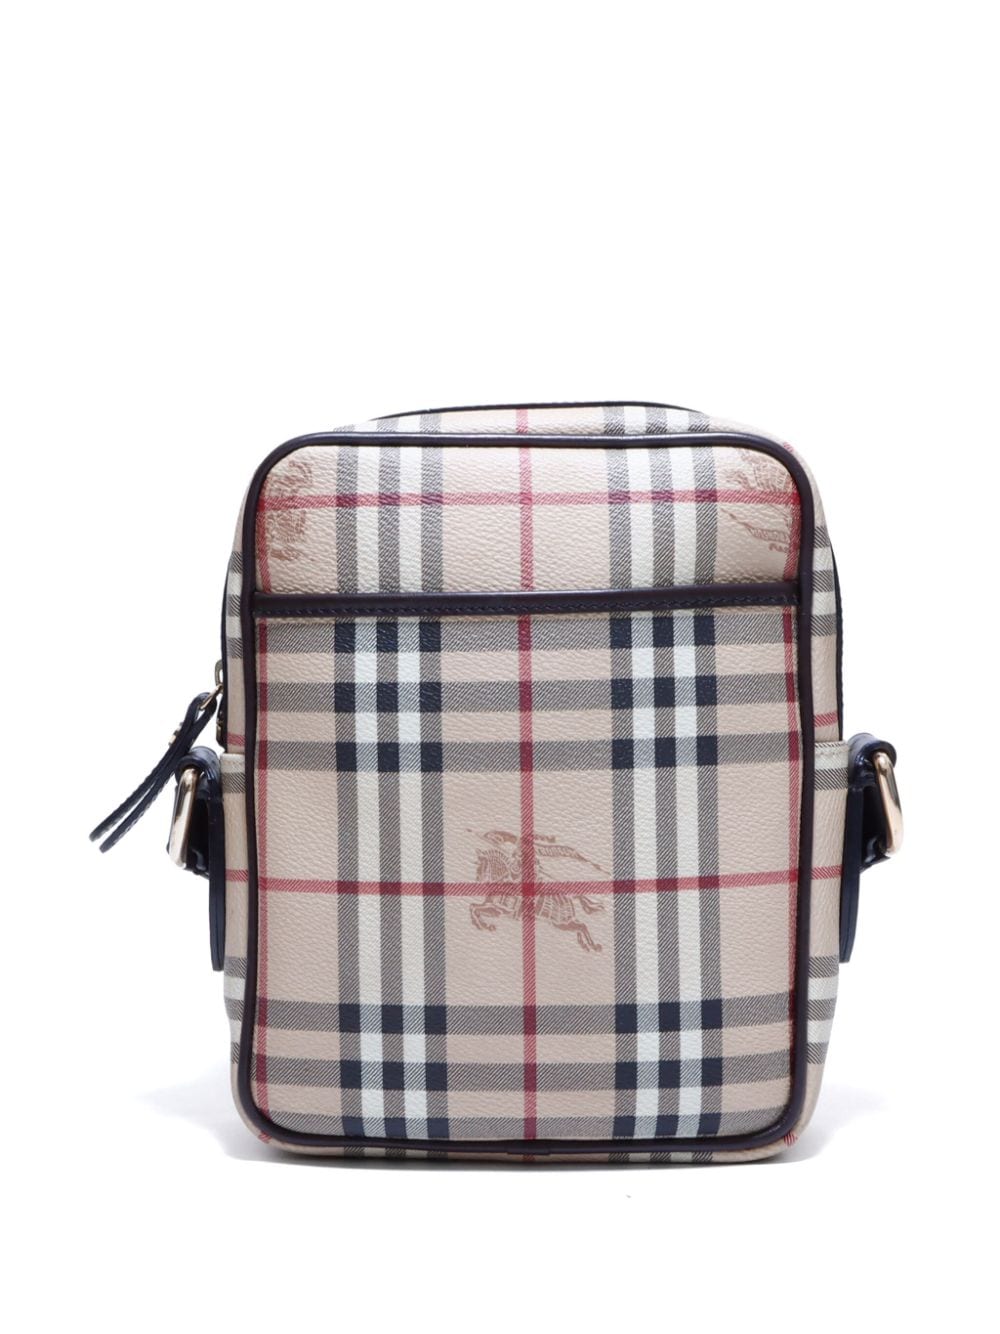 Pre-owned Burberry Haymarket Check Crossbody Bag In Neutrals